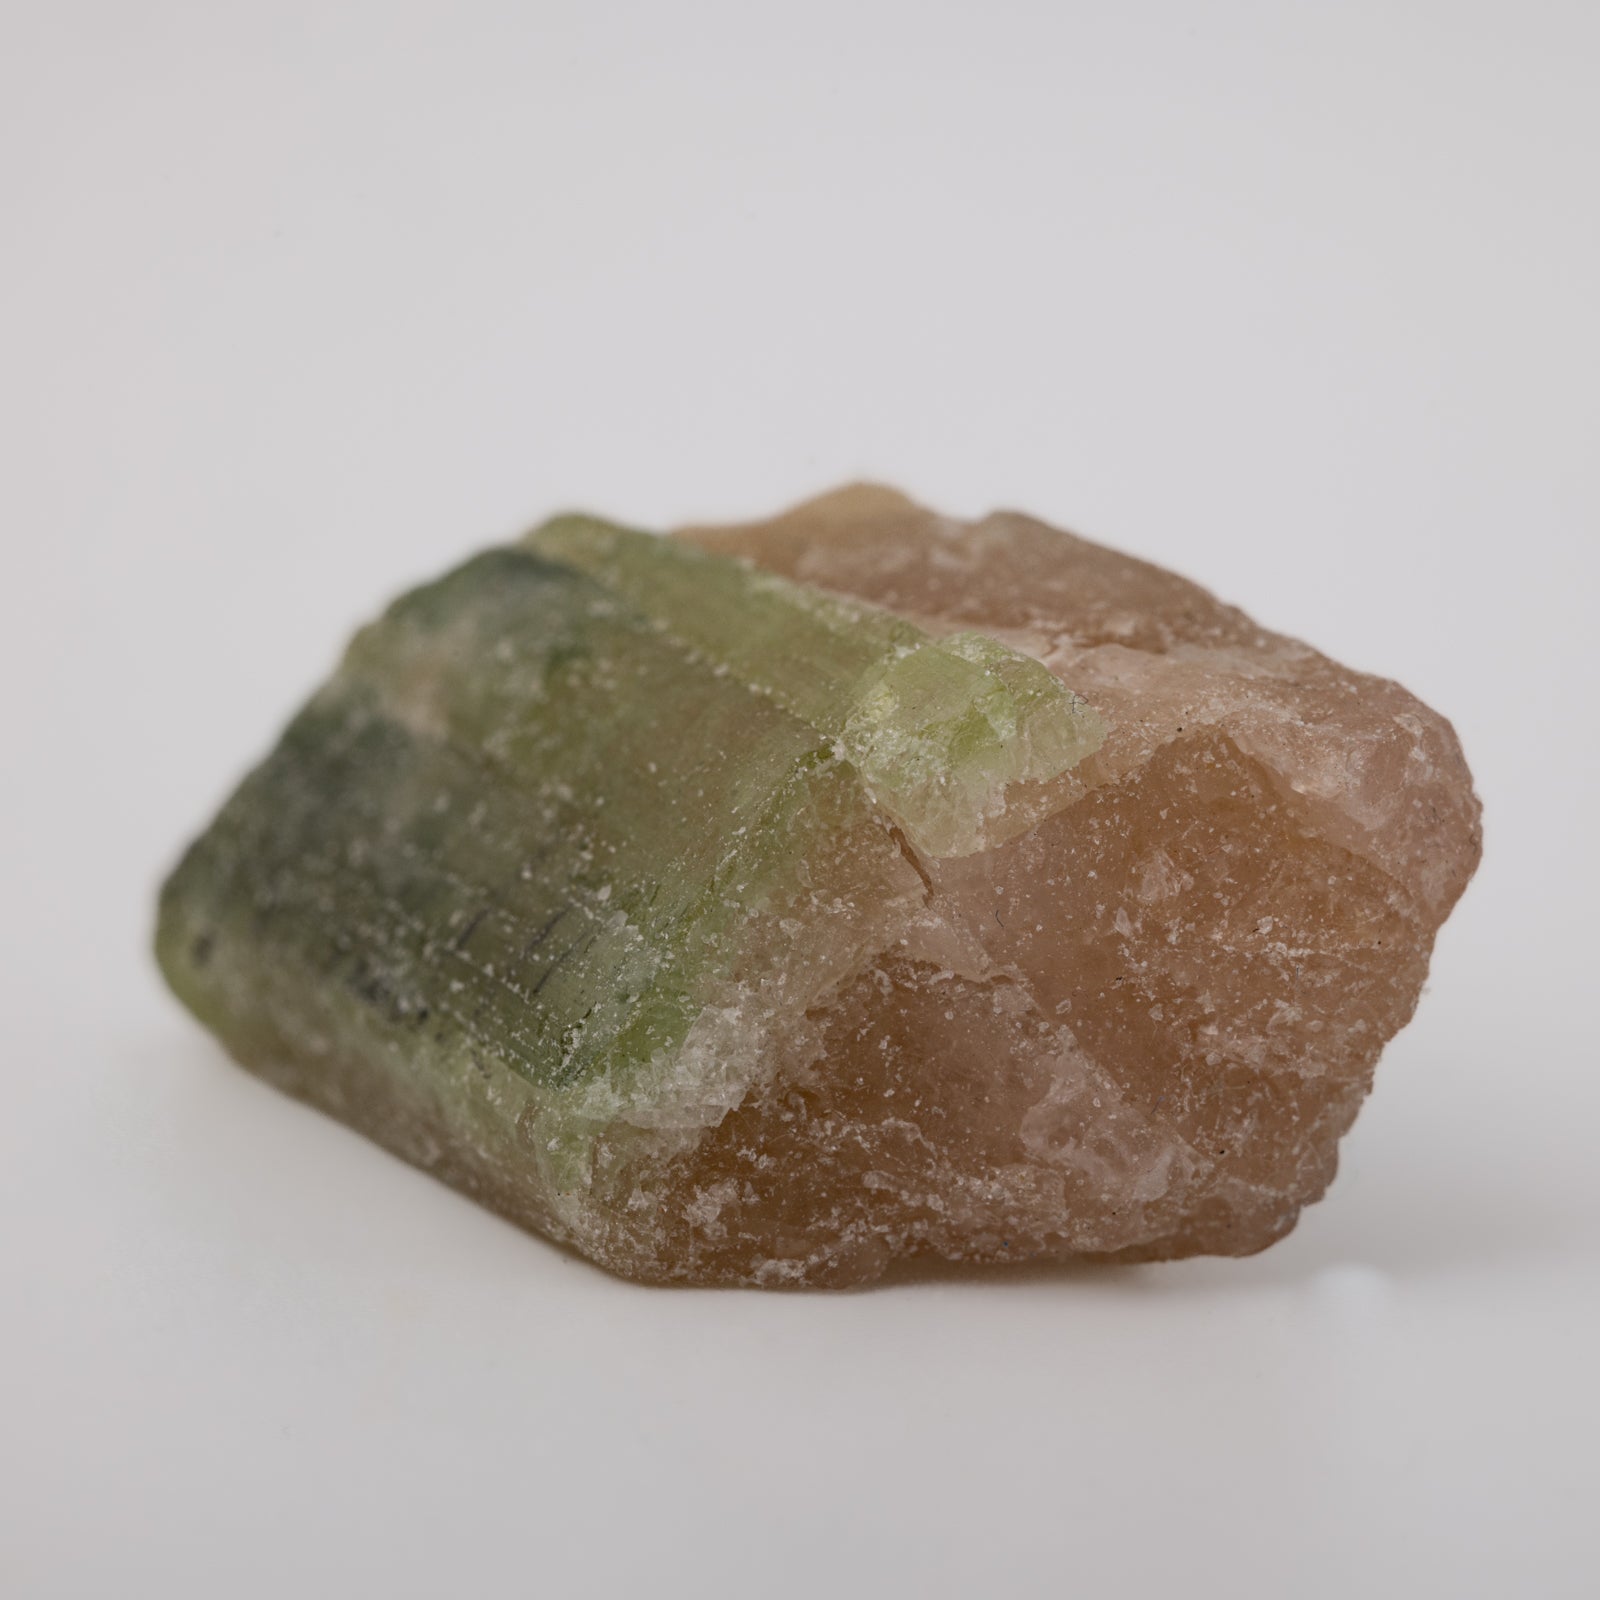 Image of pink and green tourmaline crystals